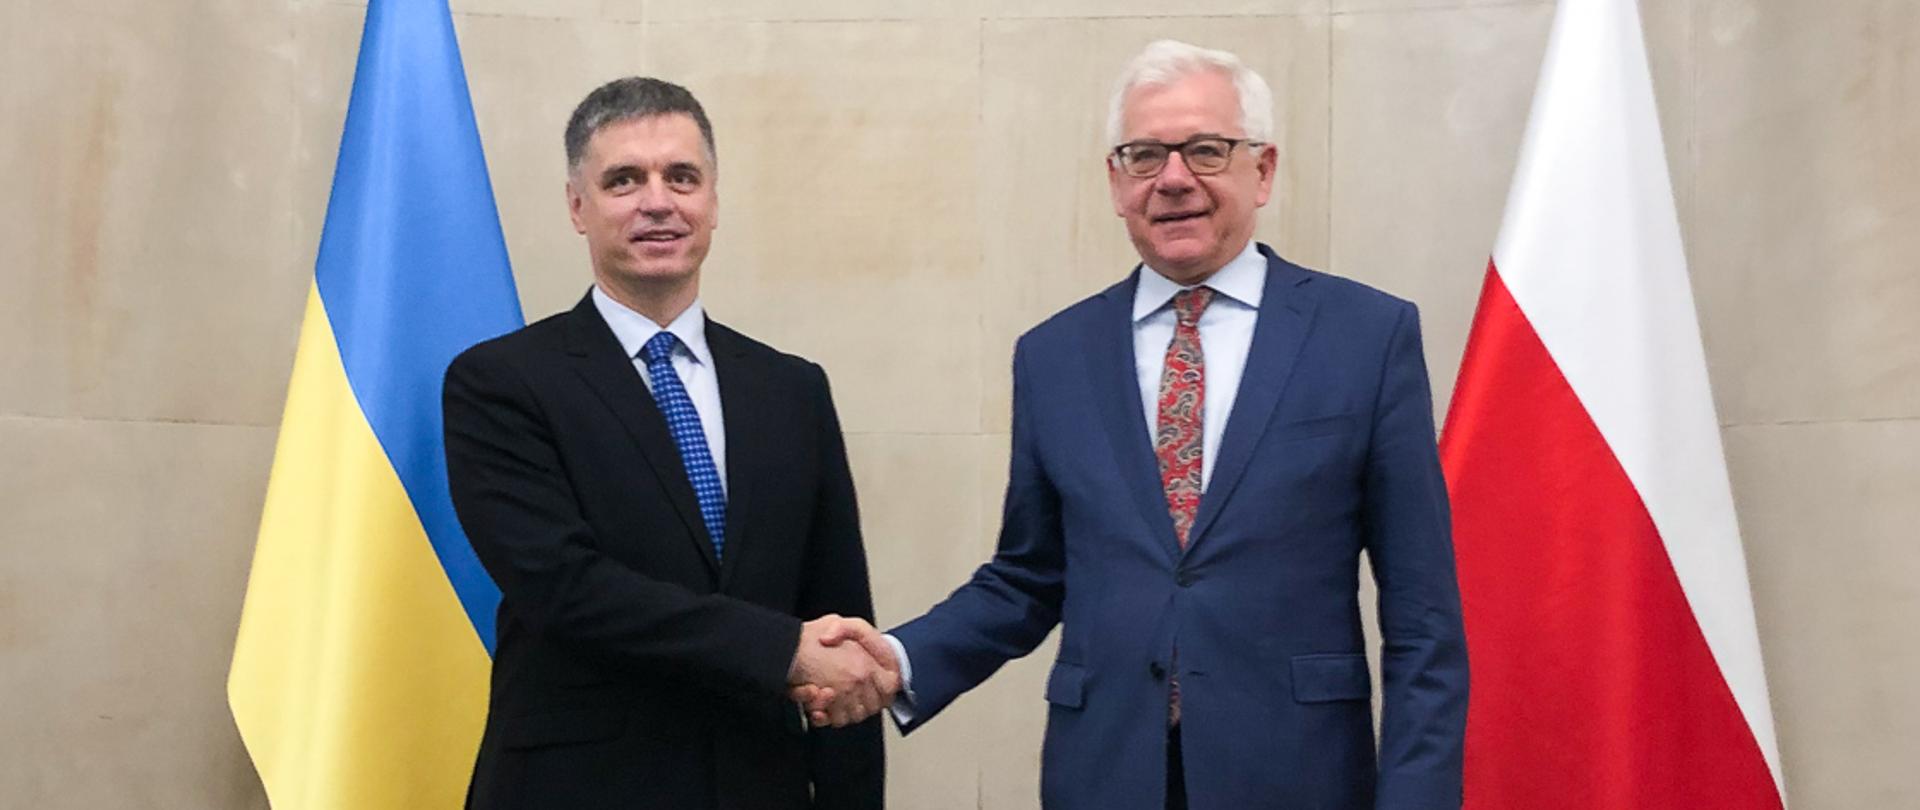 Polish and Ukrainian foreign ministers talked in Warsaw